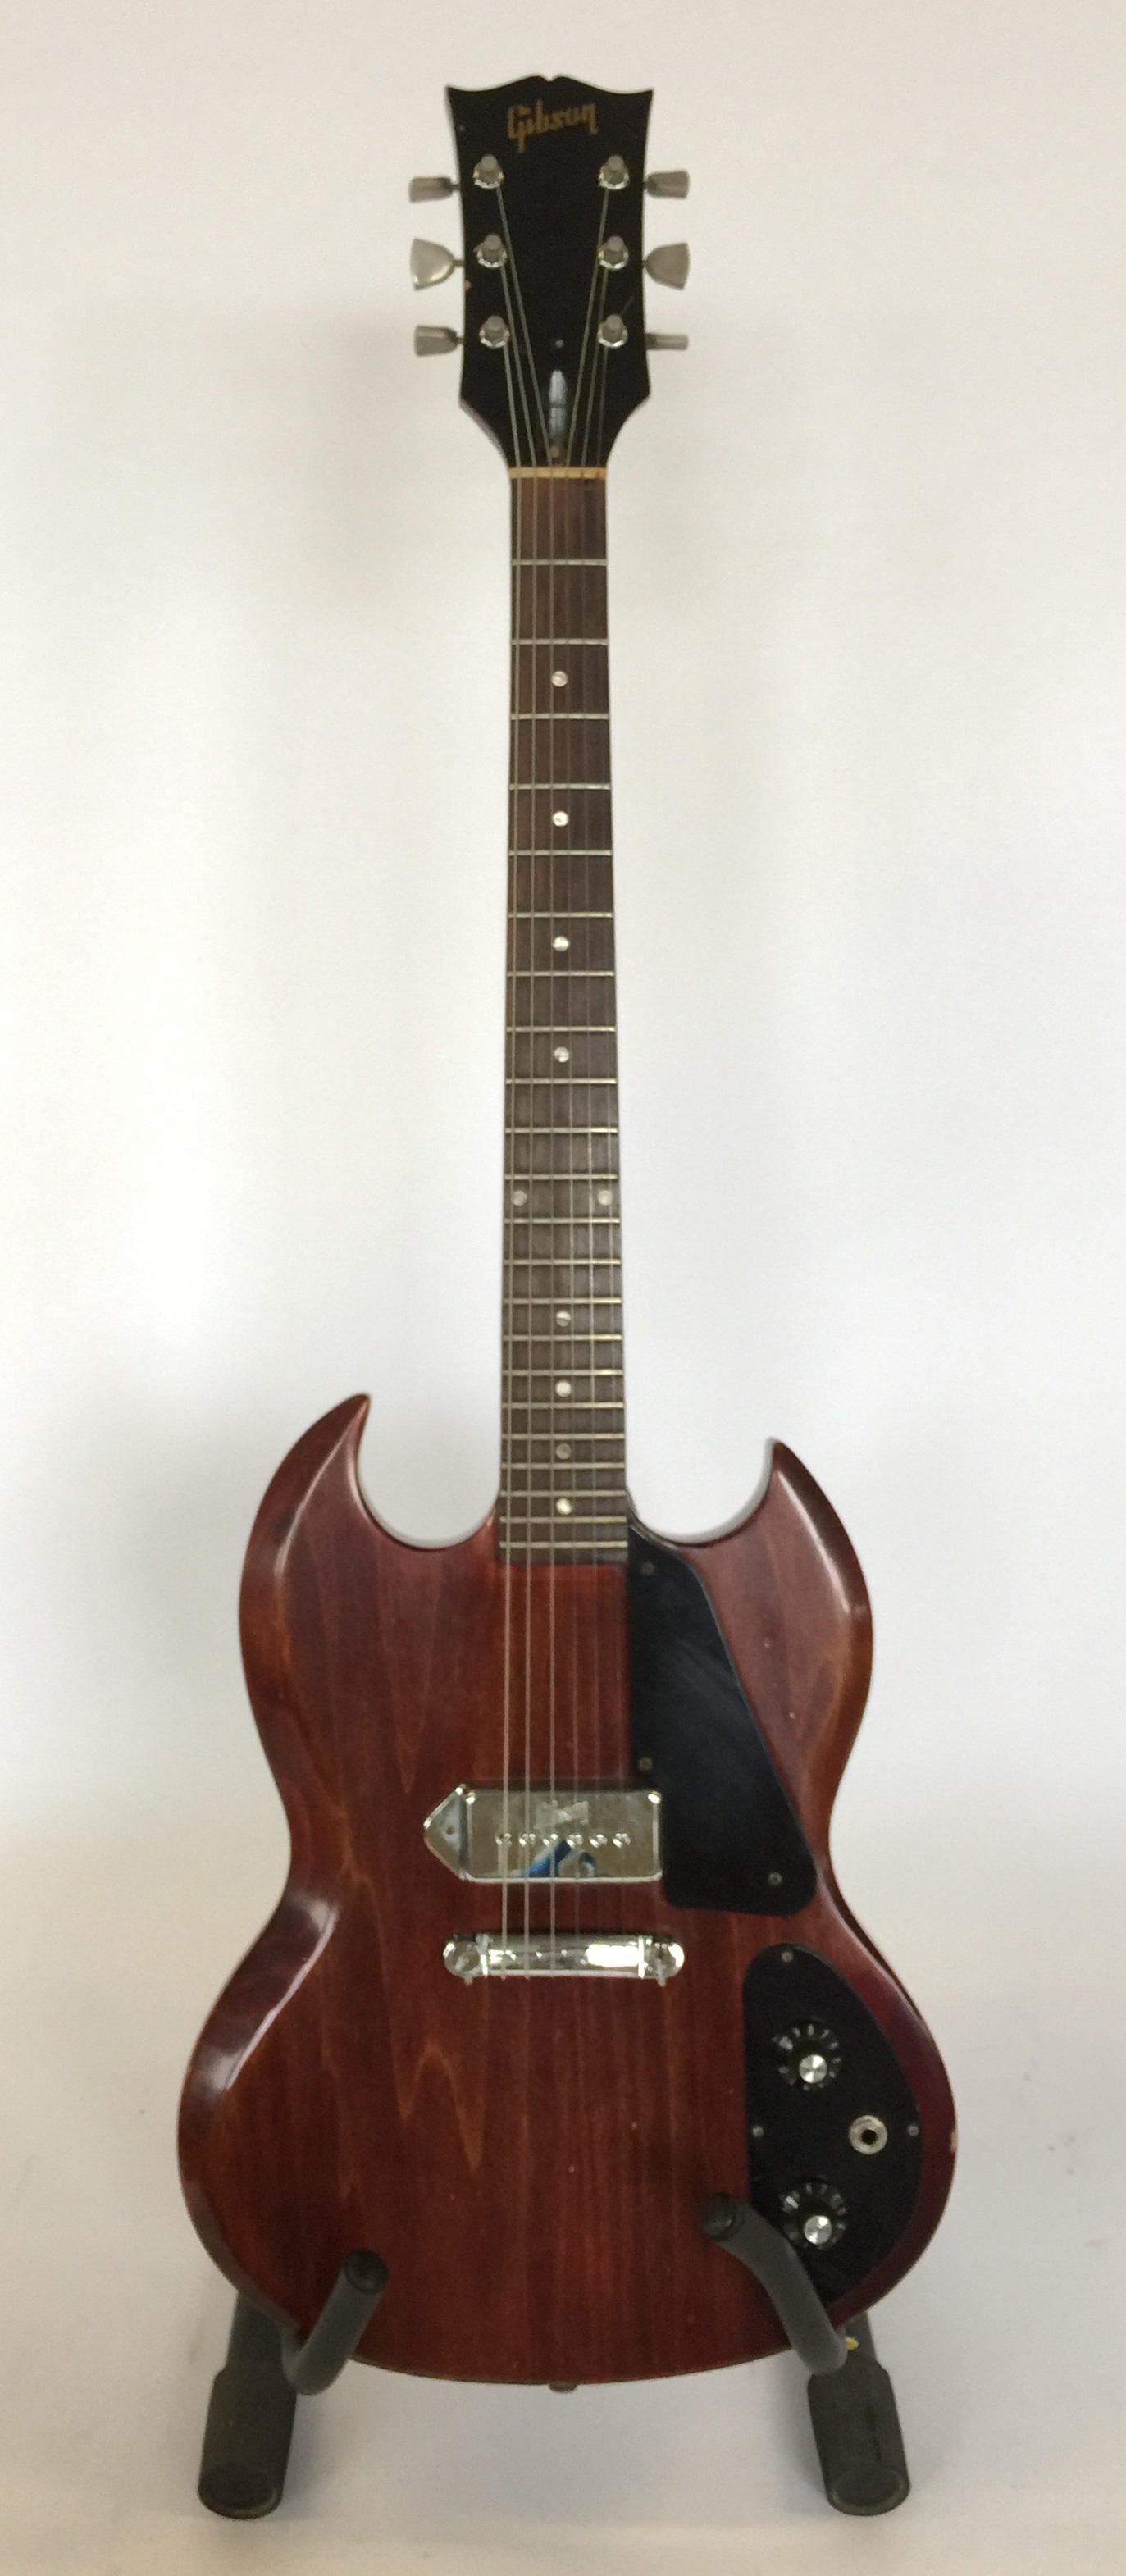 GIBSON SG1 JUNIOR 1972 - in mahogany. Serial 727569. In soft case.